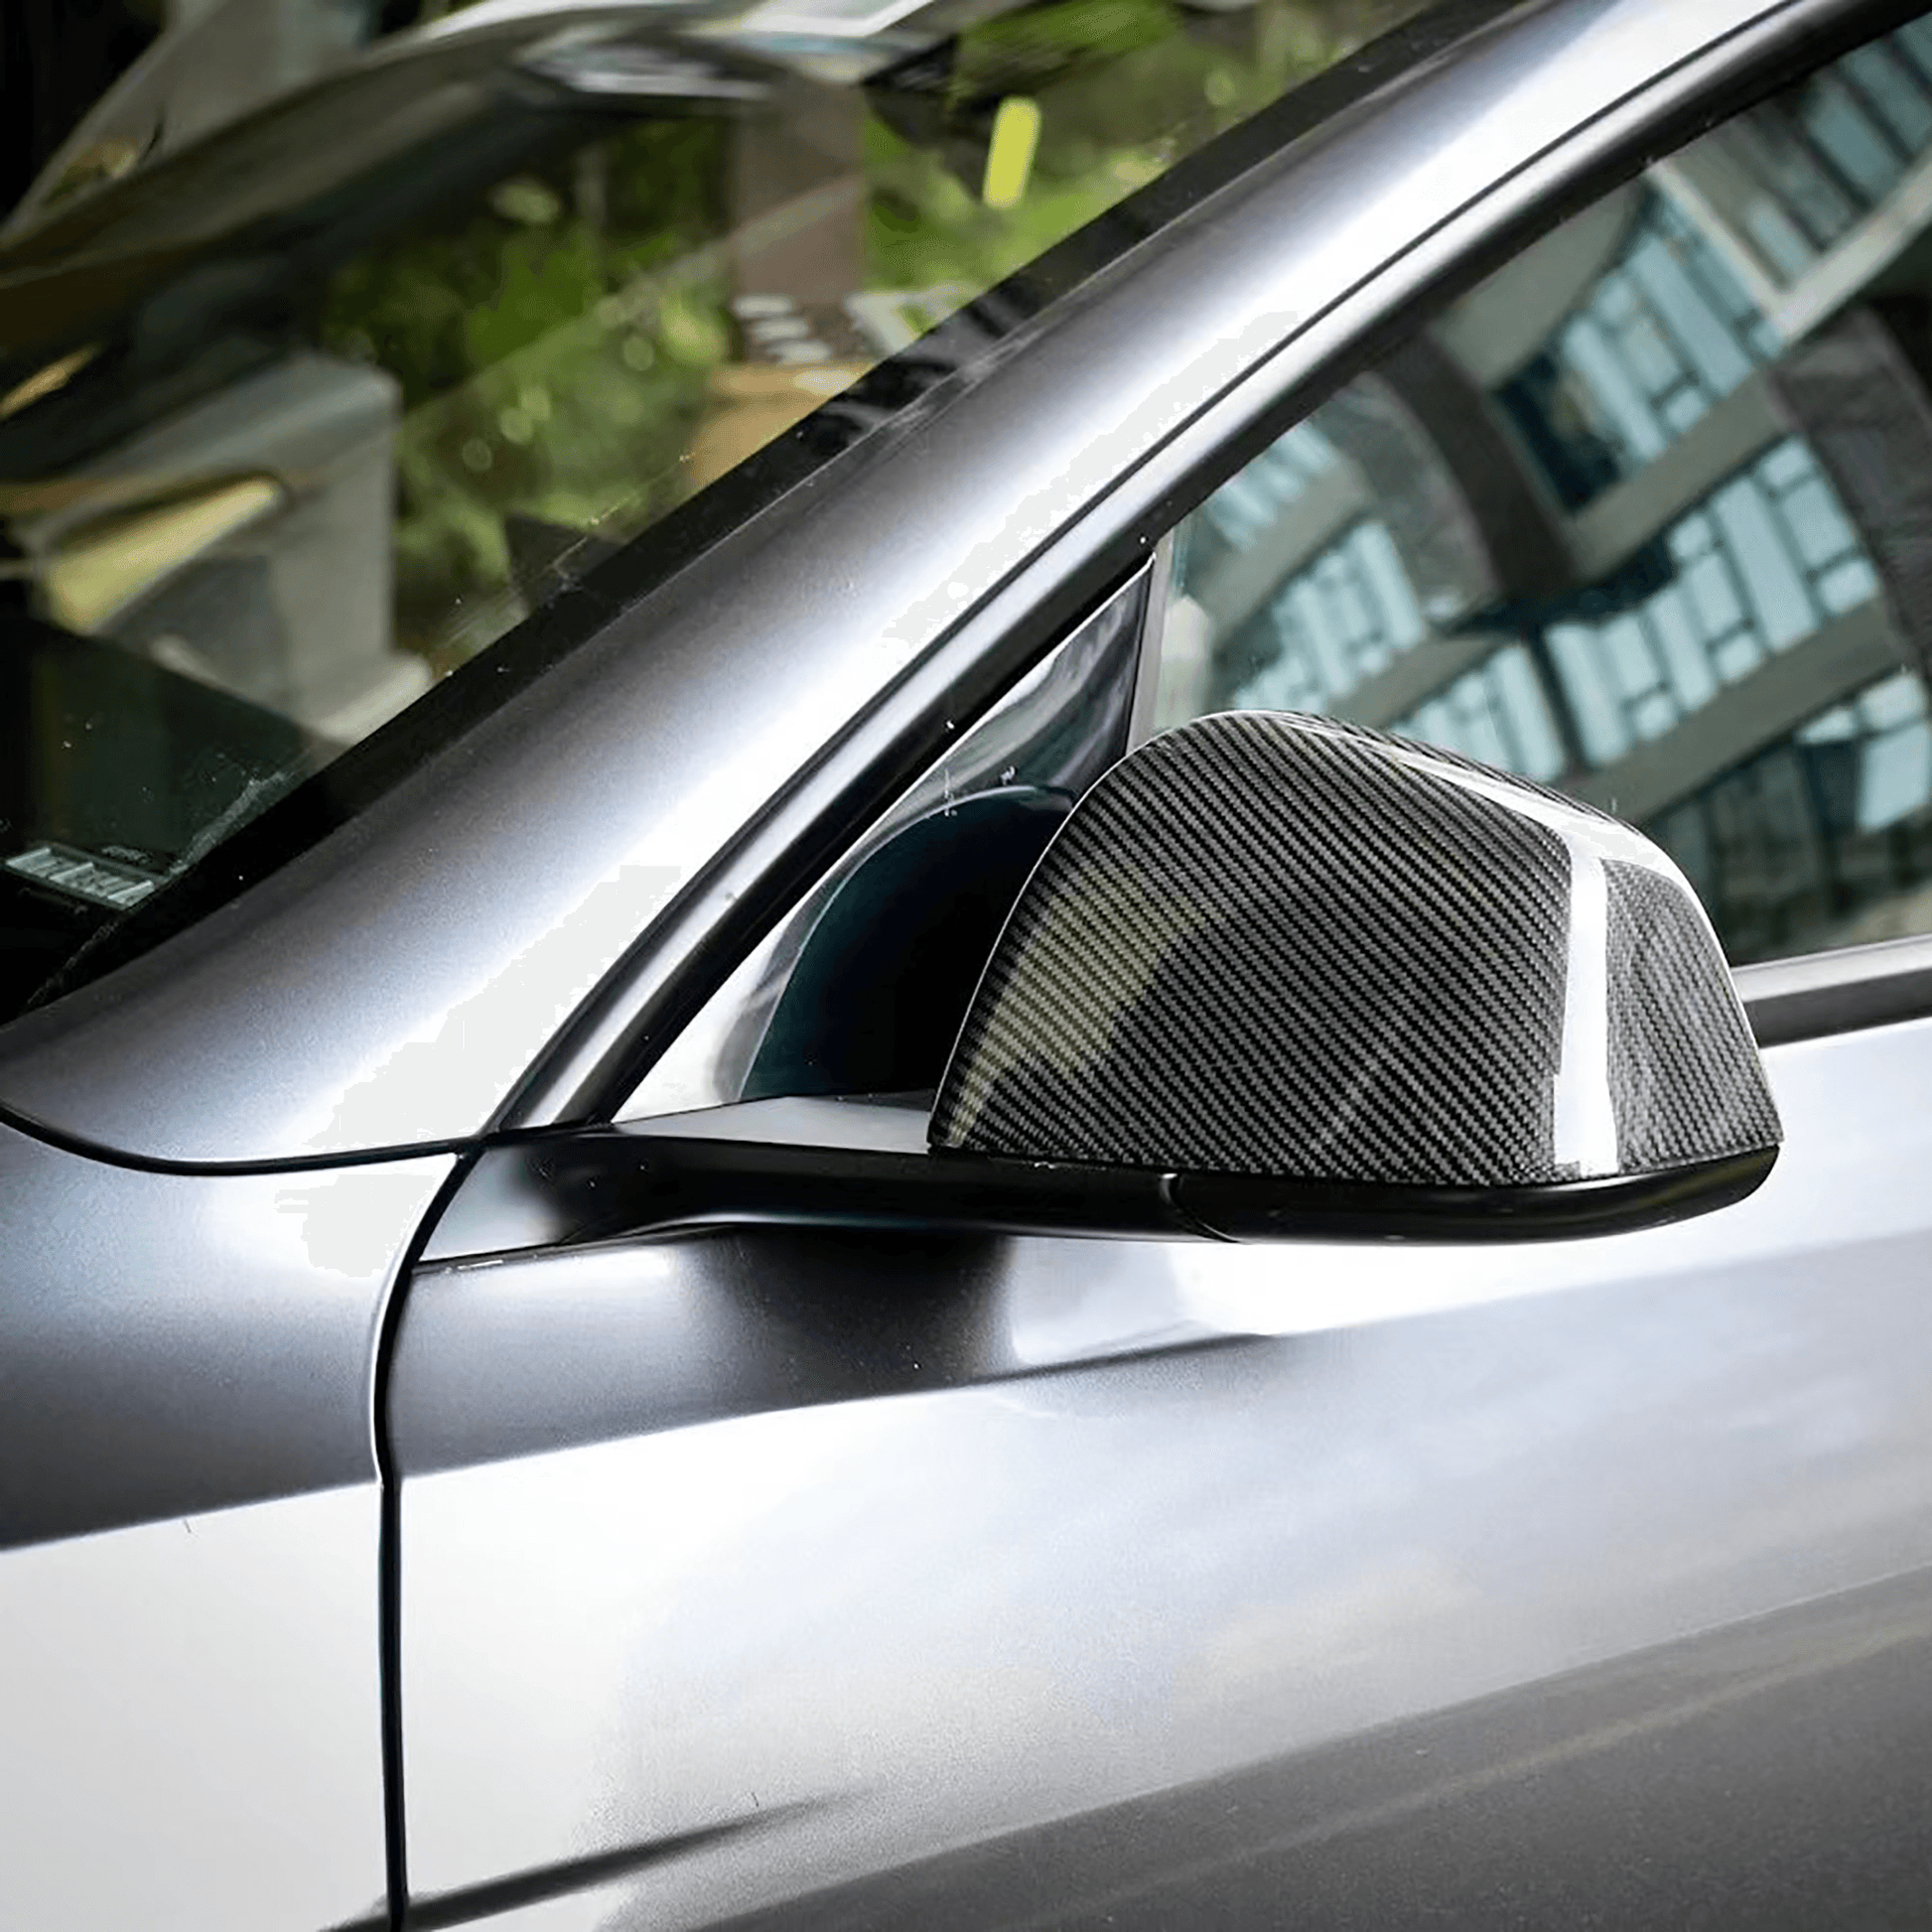 Real Carbon Fiber Mirror Covers For Tesla Model Y-Motor Vehicle Frame & Body Parts-Yeslak